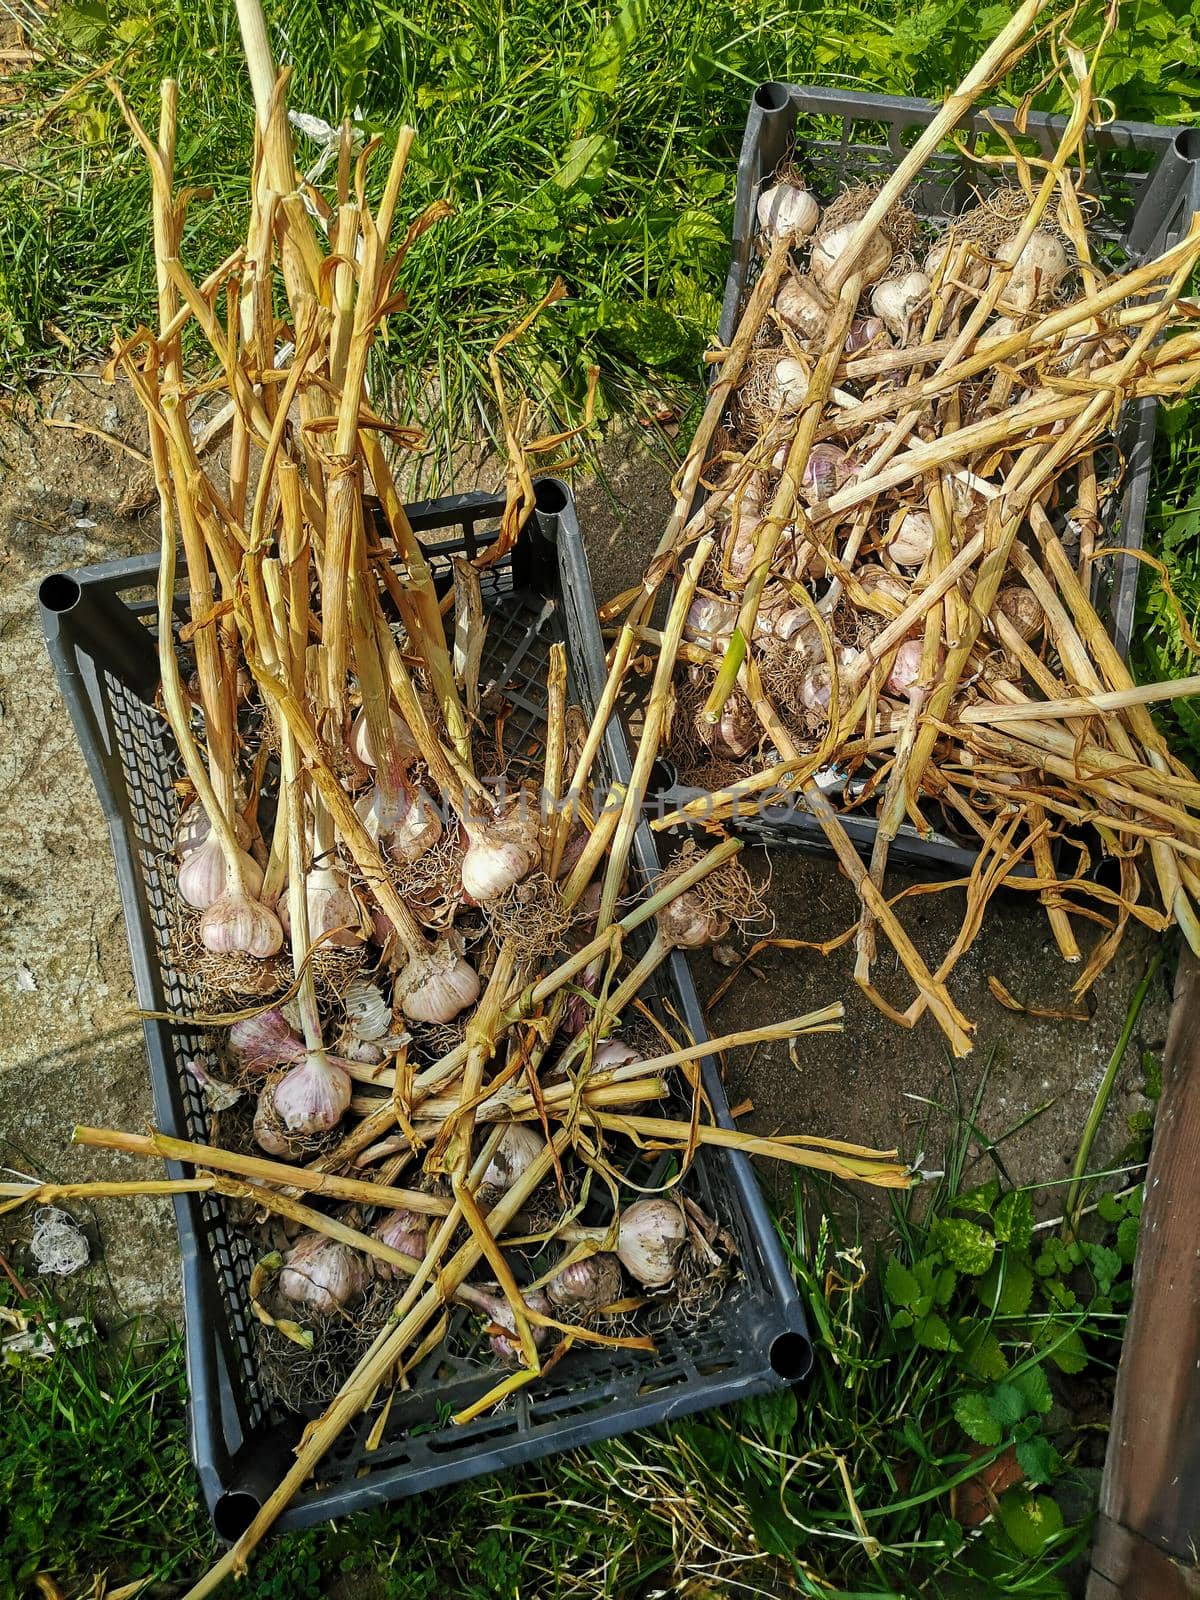 Freshly harvested garlic lies in boxes on the ground in the garden by galinasharapova